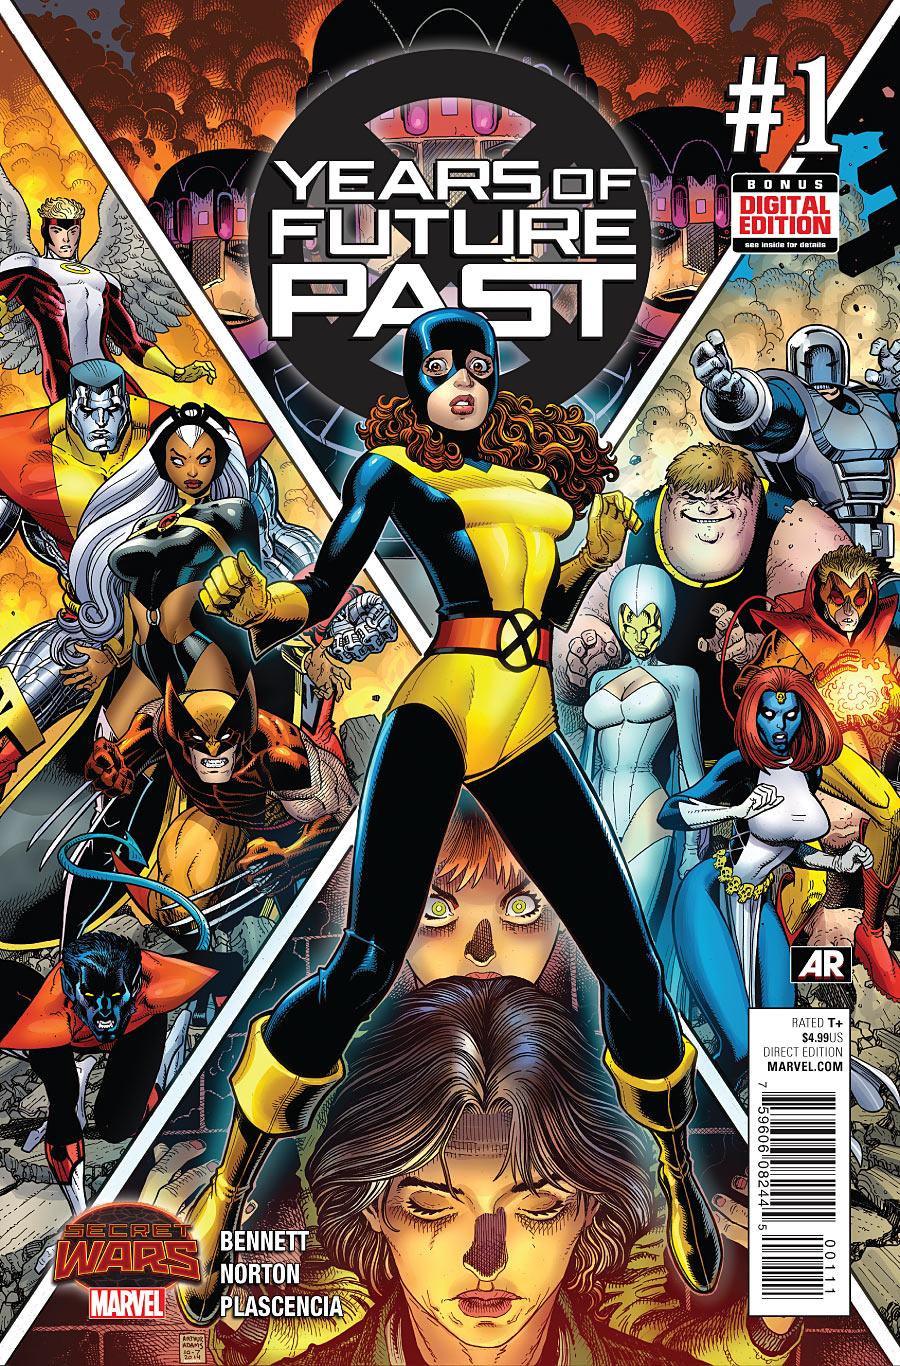 Years of Future Past Vol. 1 #1